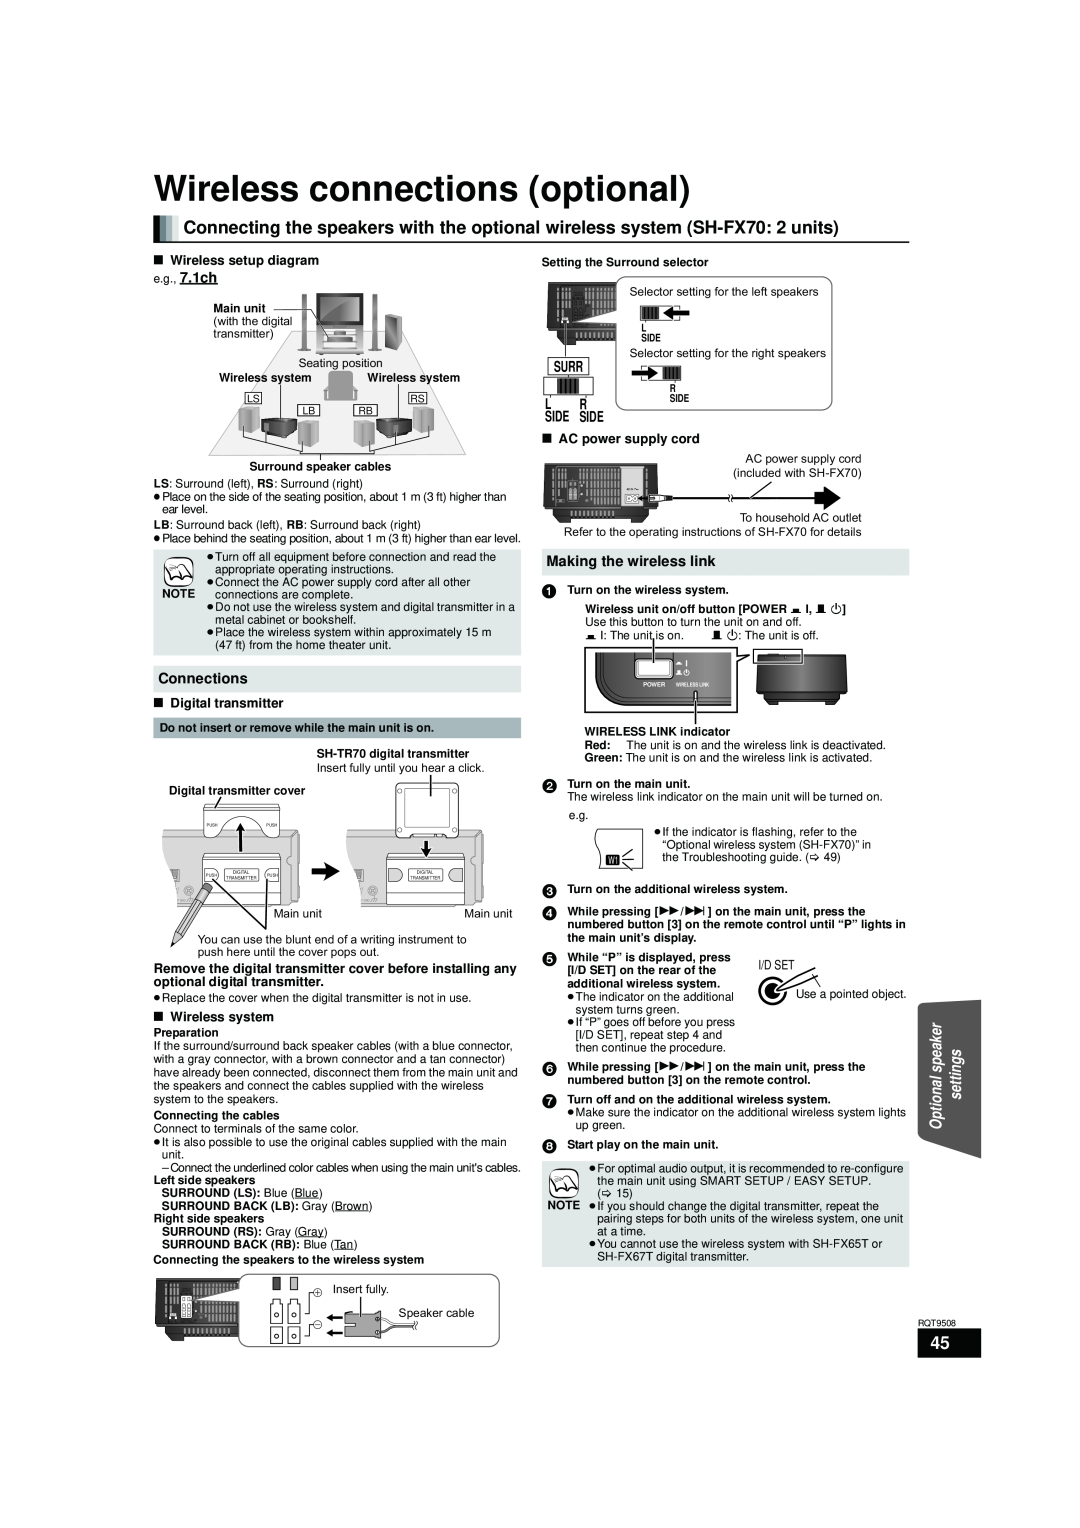 Panasonic SC-BT200 Wireless connections optional, Connections, Surr, Side, Making the wireless link, Digital transmitter 